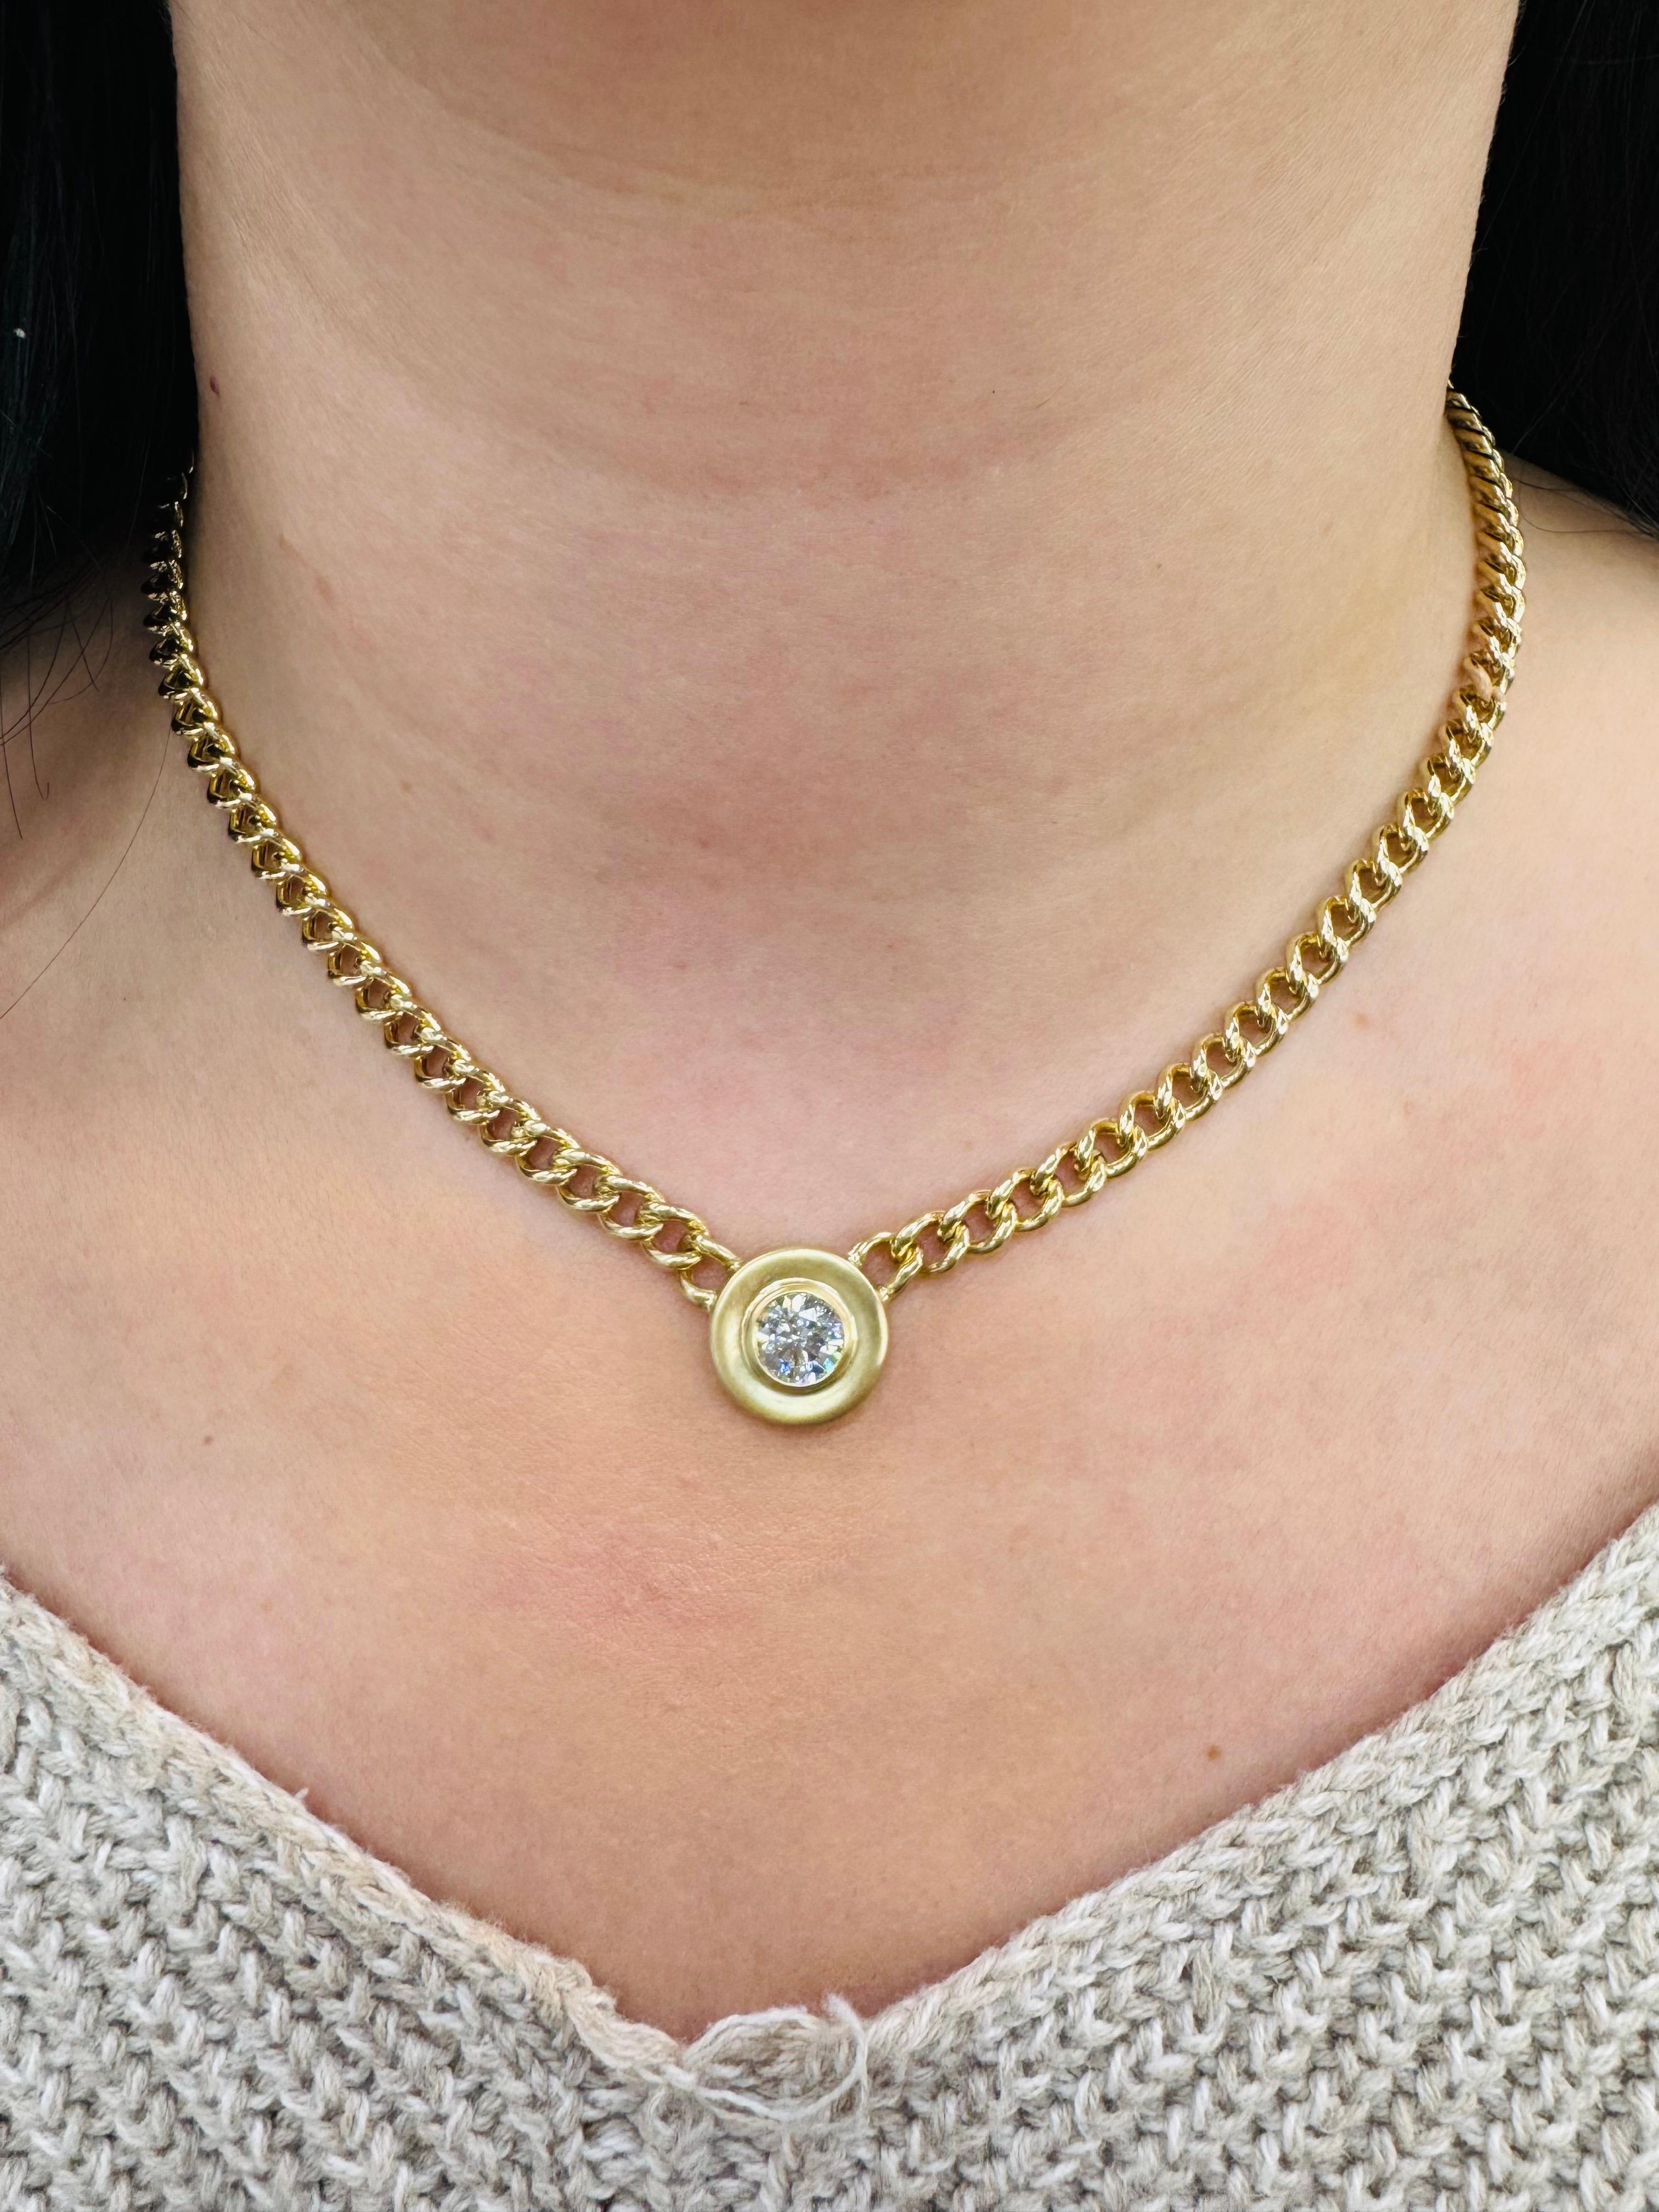 14 karat yellow gold Cuban link chain necklace featuring a round brilliant weighing 1.11 carats on a matte finished pendant.
Color J-K
Clarity SI1
Nice brilliants & life!